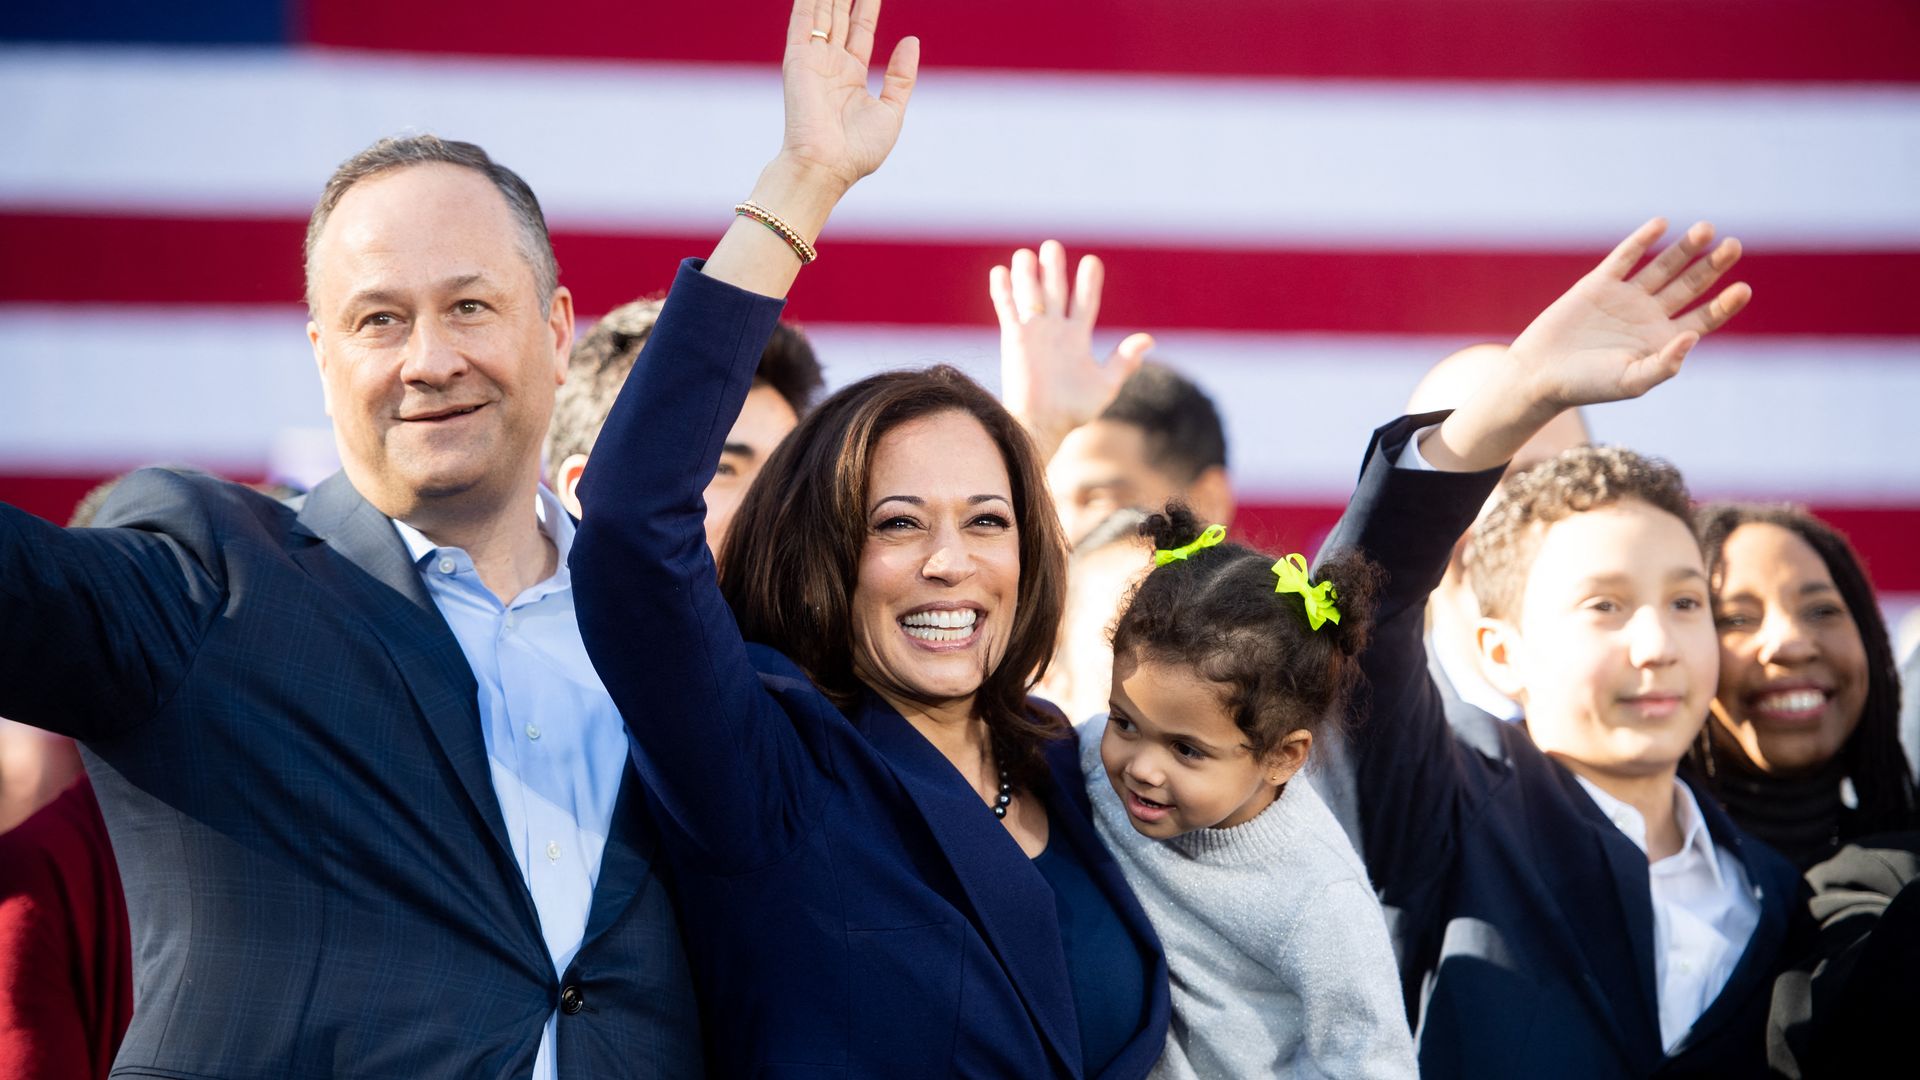 Meet the family of Kamala Harris, a potential candidate to face Trump in the 2024 election